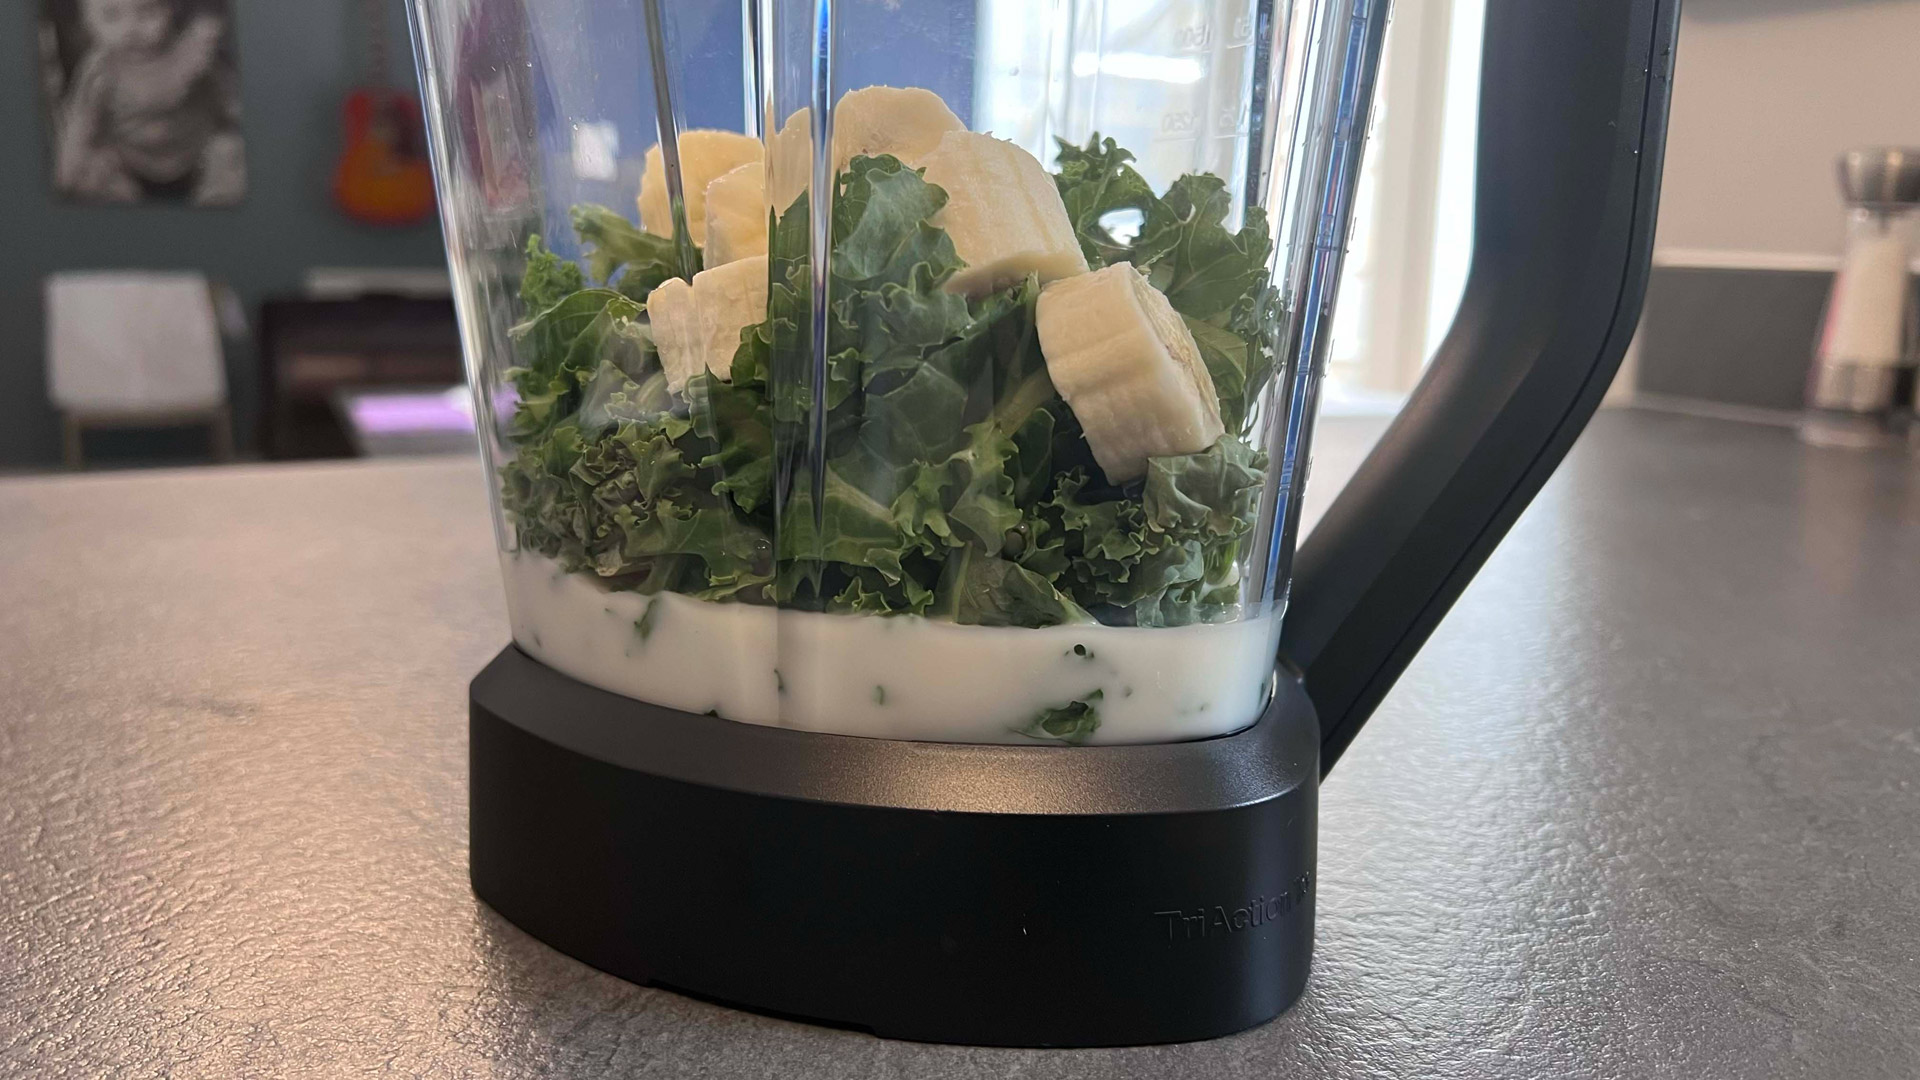 Making a kale, blueberry and banana smoothie in the Braun TriForce Power Blender